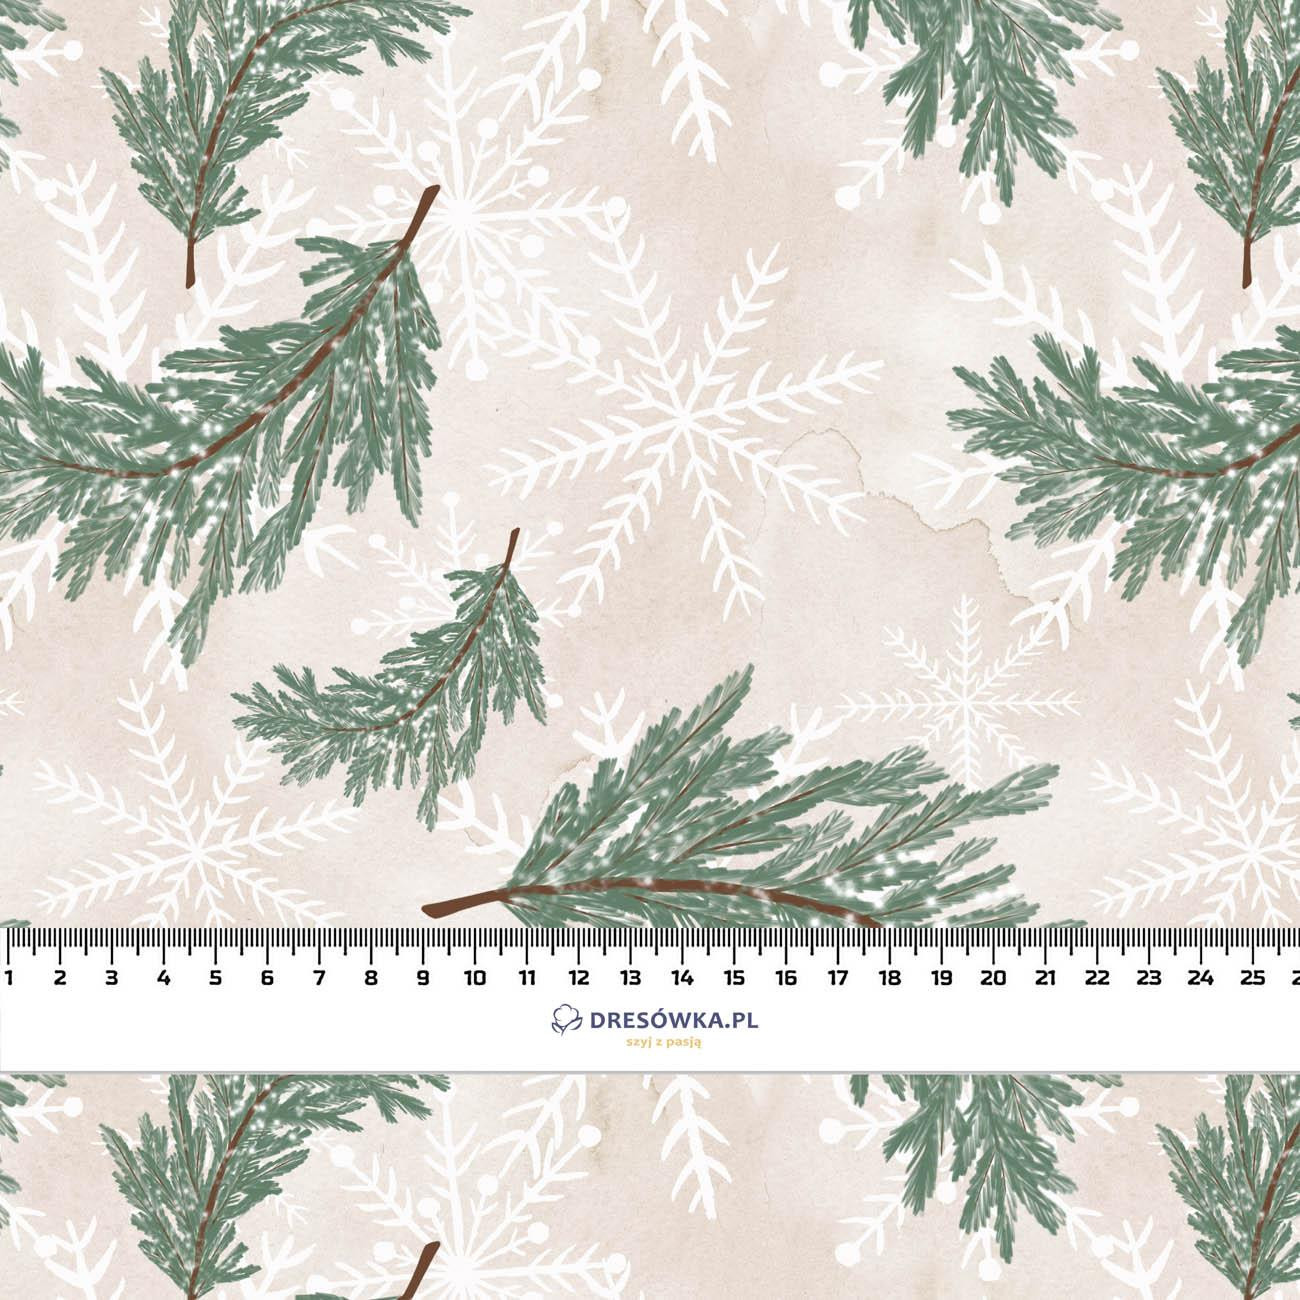 TWIGS AND SNOWFLAKES (WINTER IN THE CITY) - Waterproof woven fabric